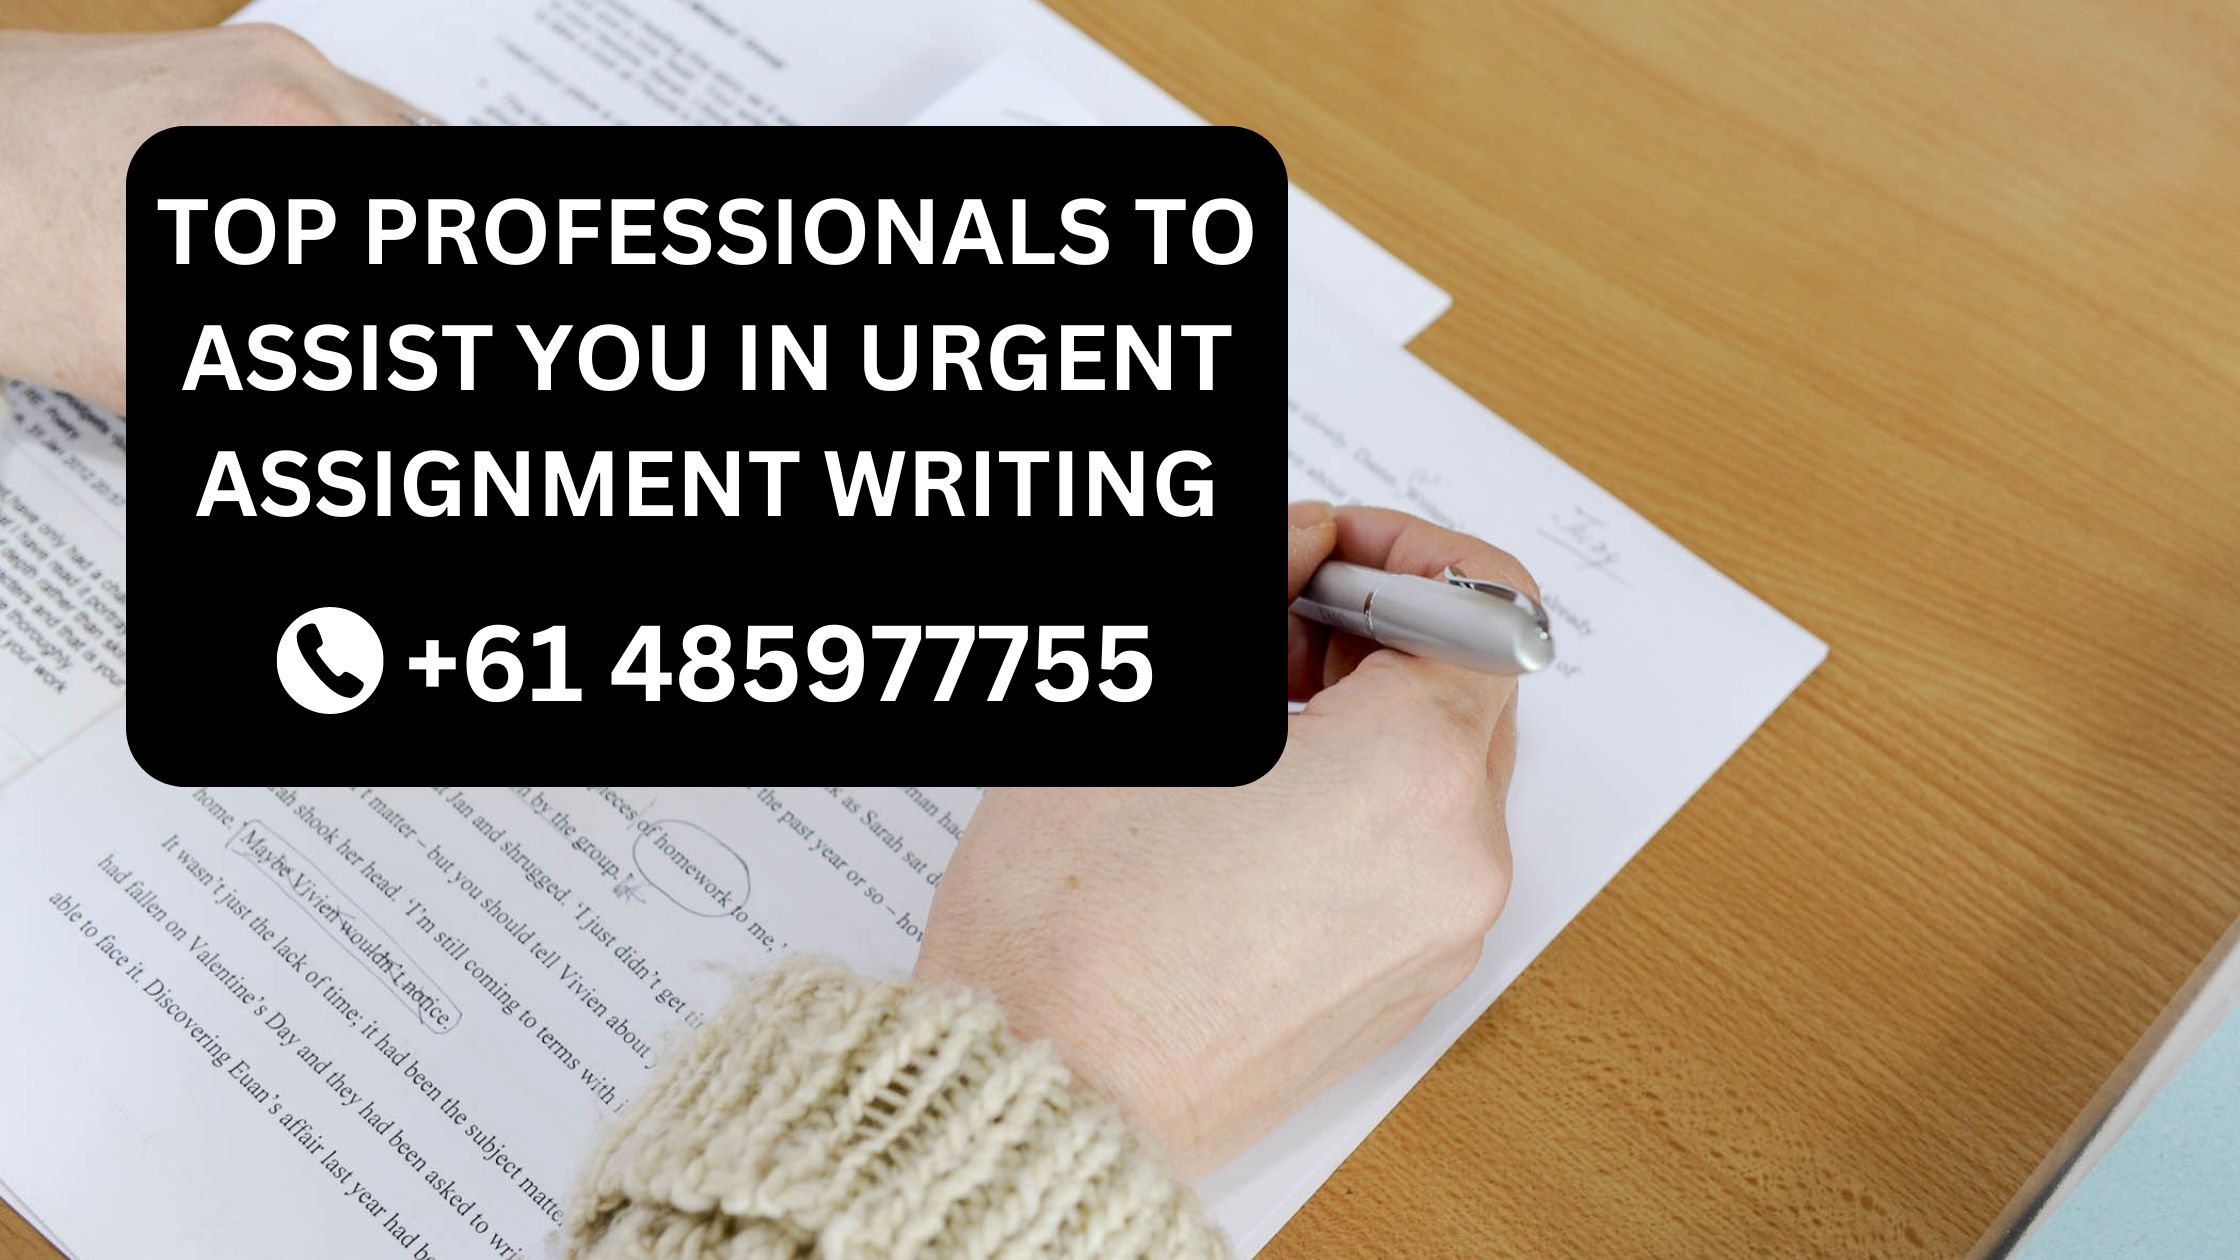 Top Professionals To Assist You In Urgent Assignment Writing